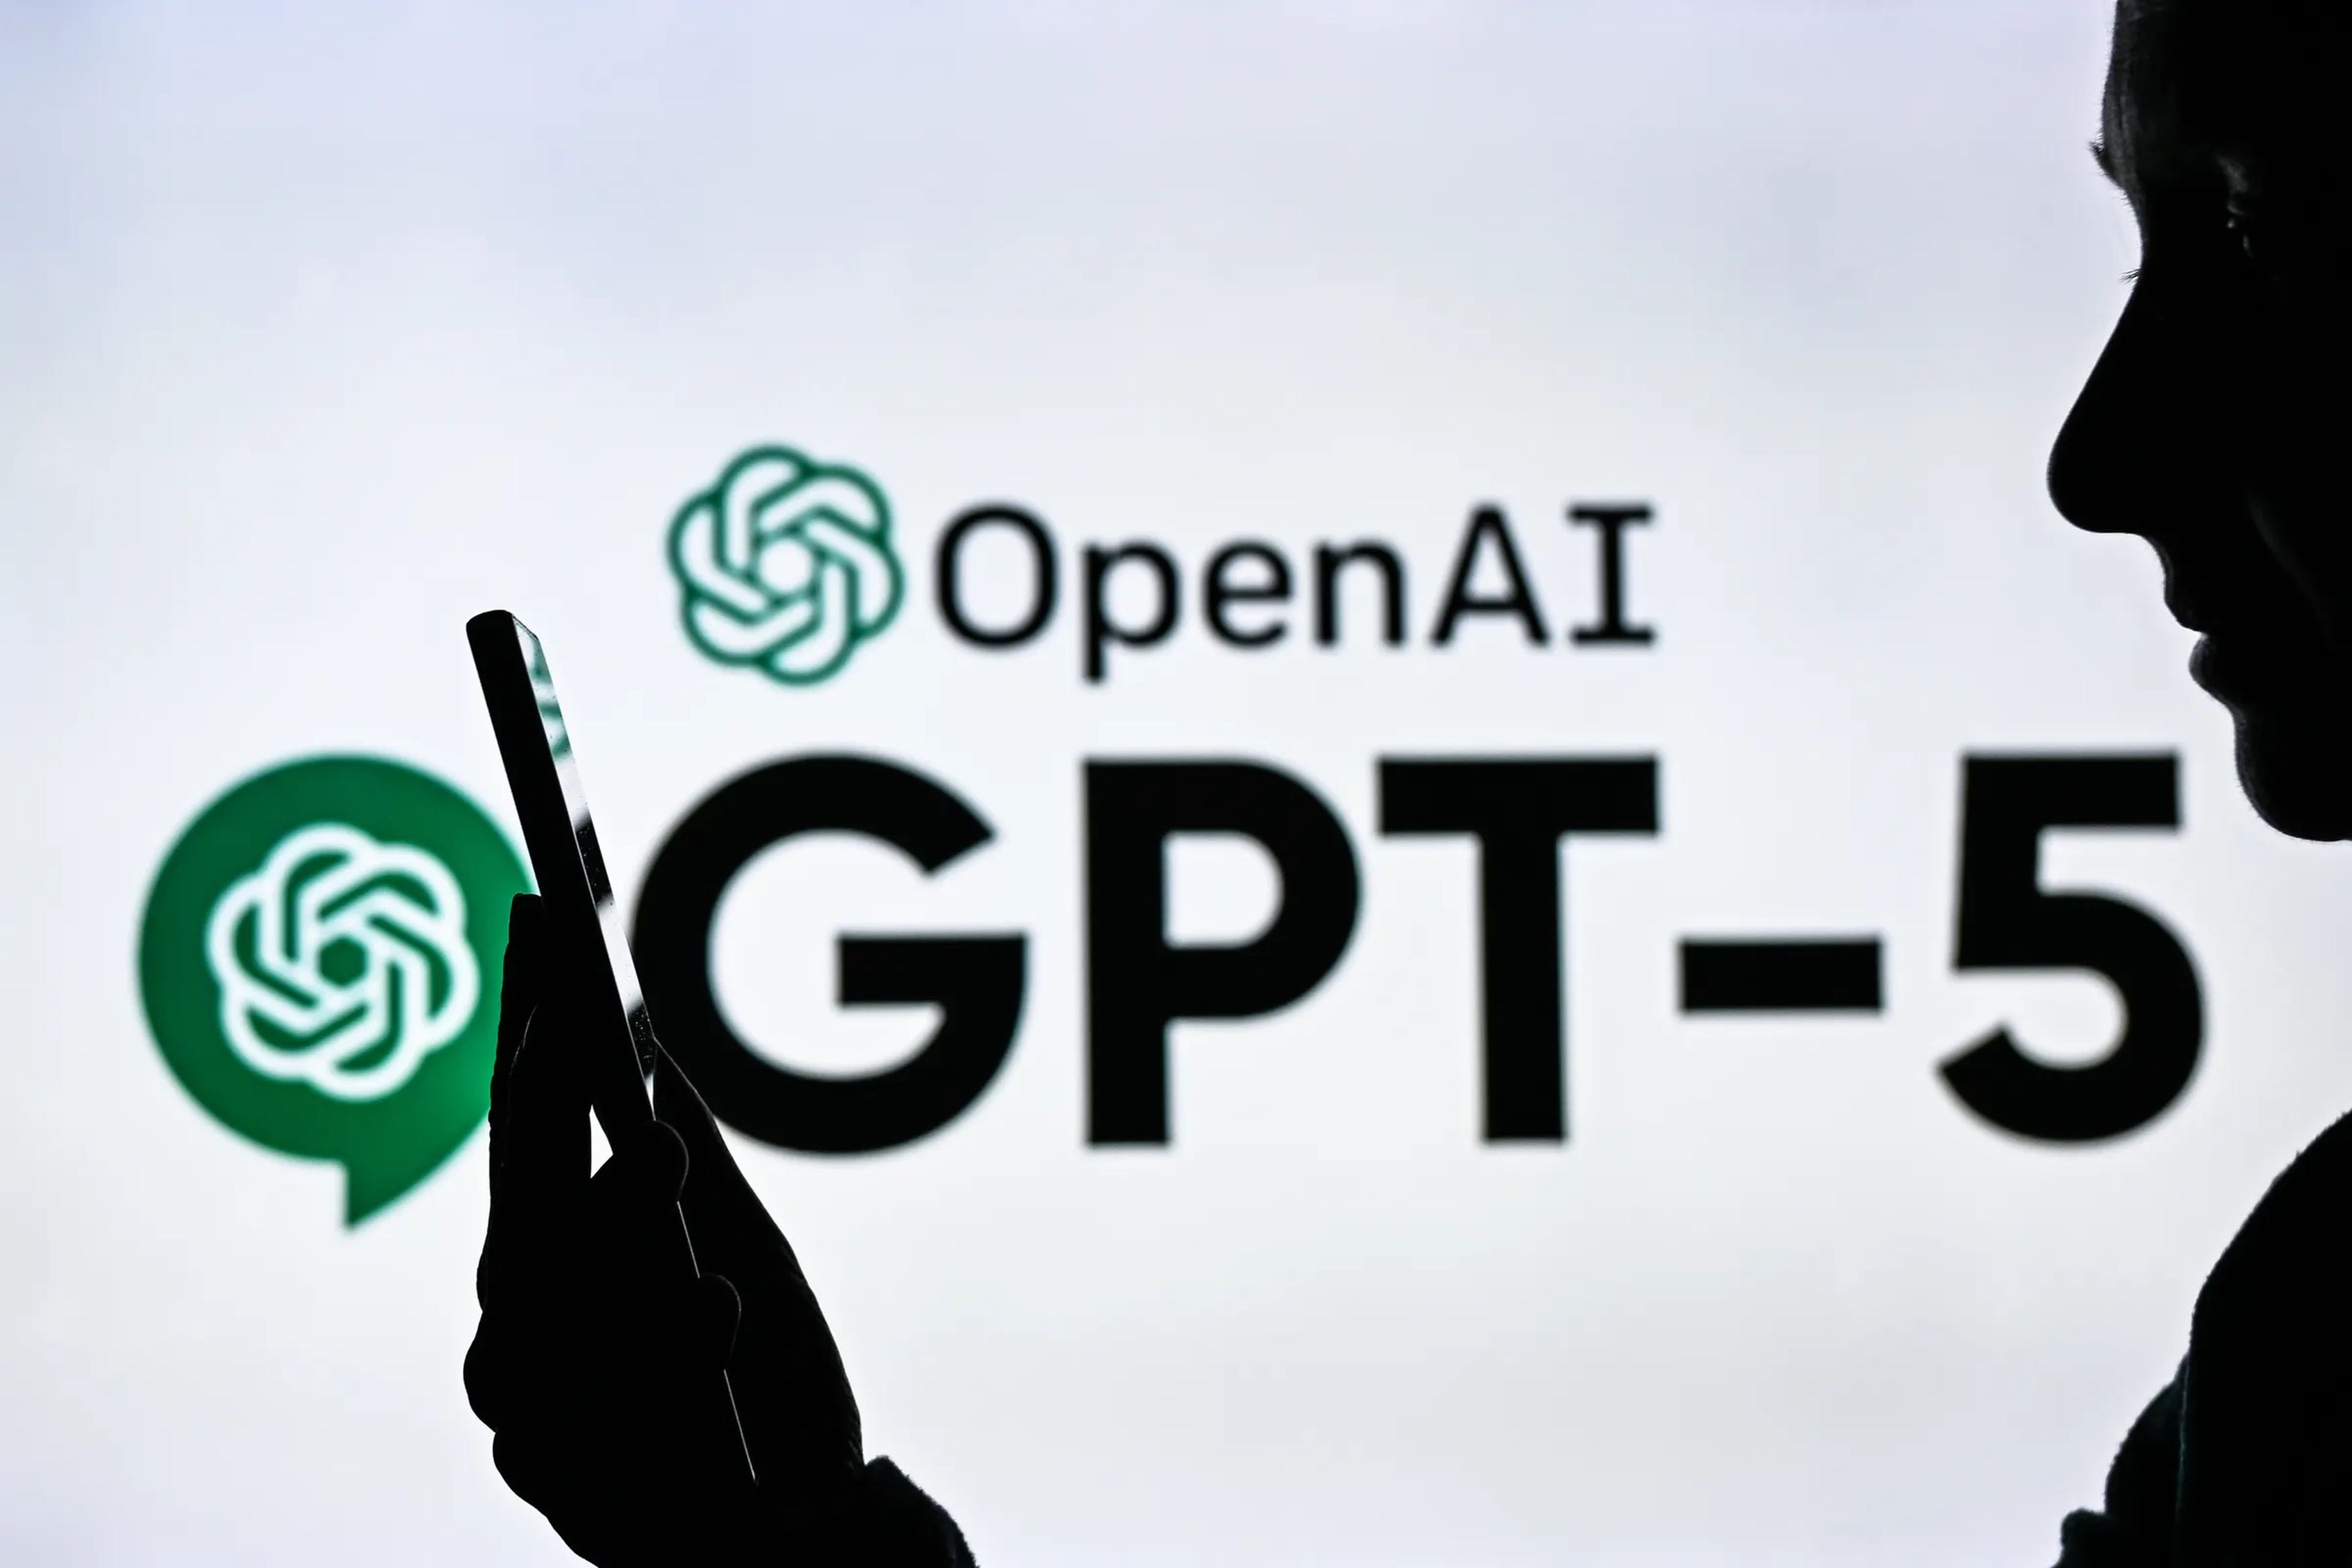 OpenAI logo with text that says GPT-5 behind a person holding a phone